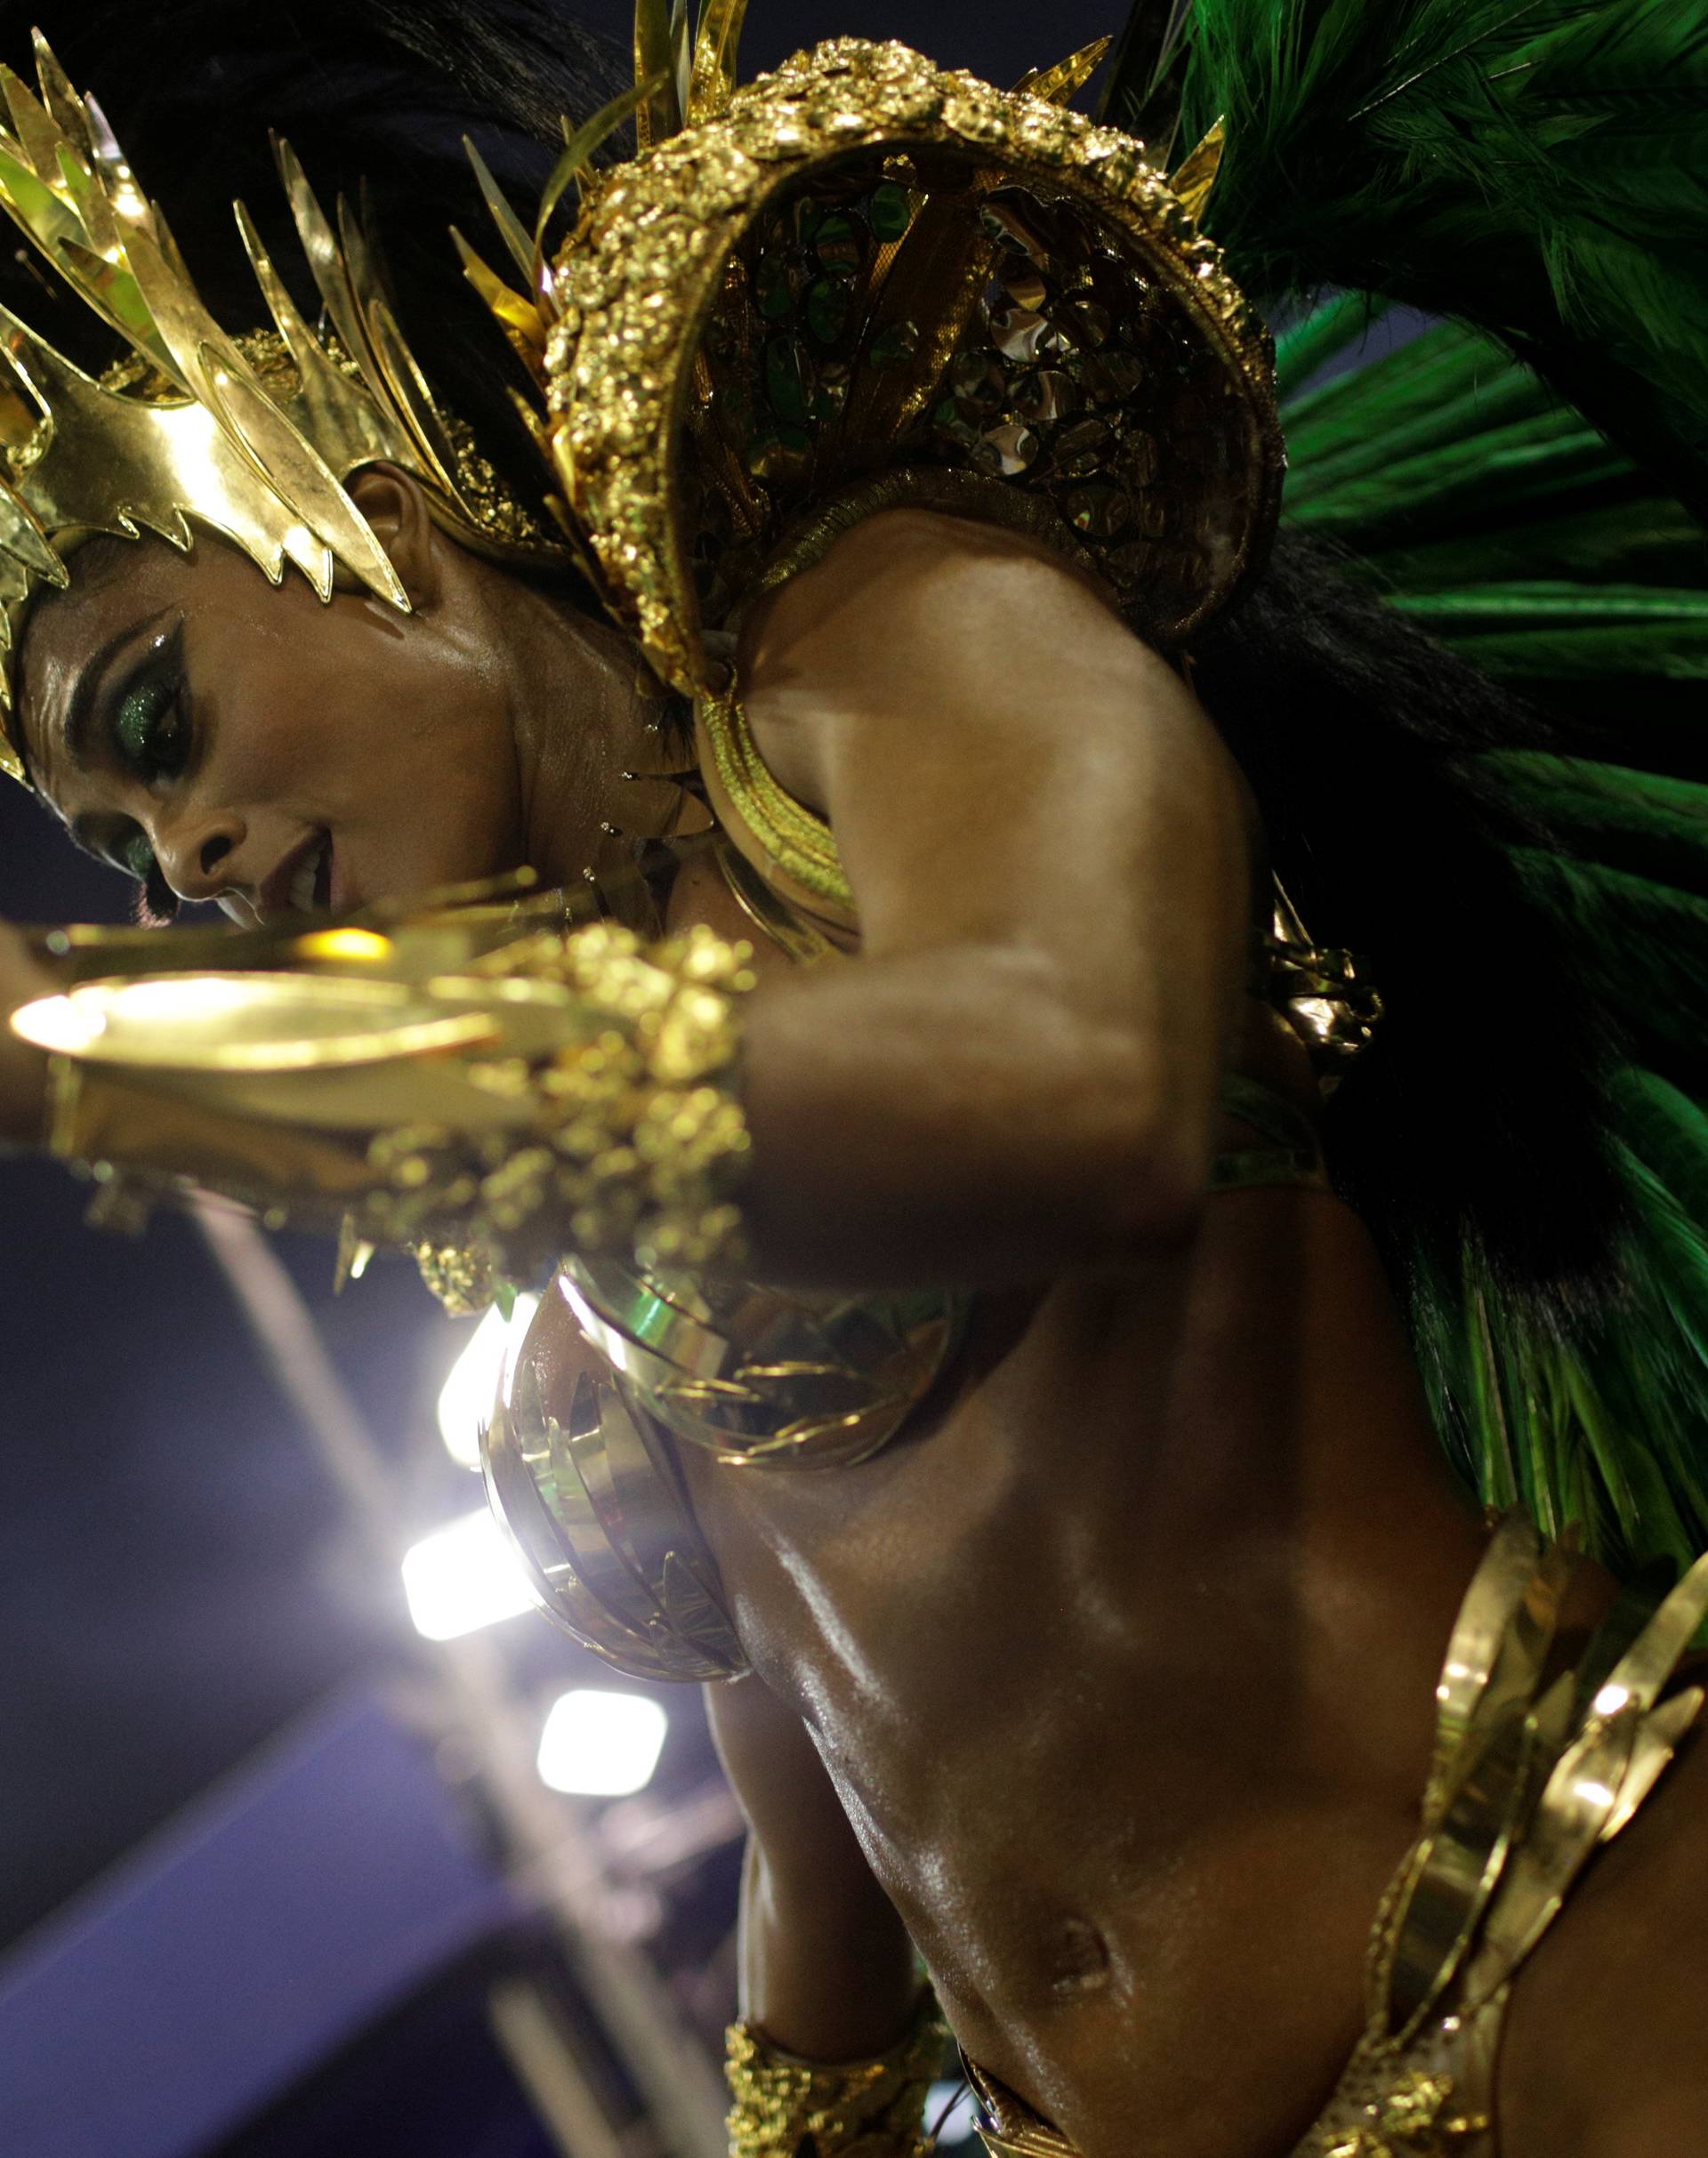 Drum queen Juliana Paes from Grande Rio Samba school perform during the first night of the Carnival parade at the Sambadrome in Rio de Janeiro